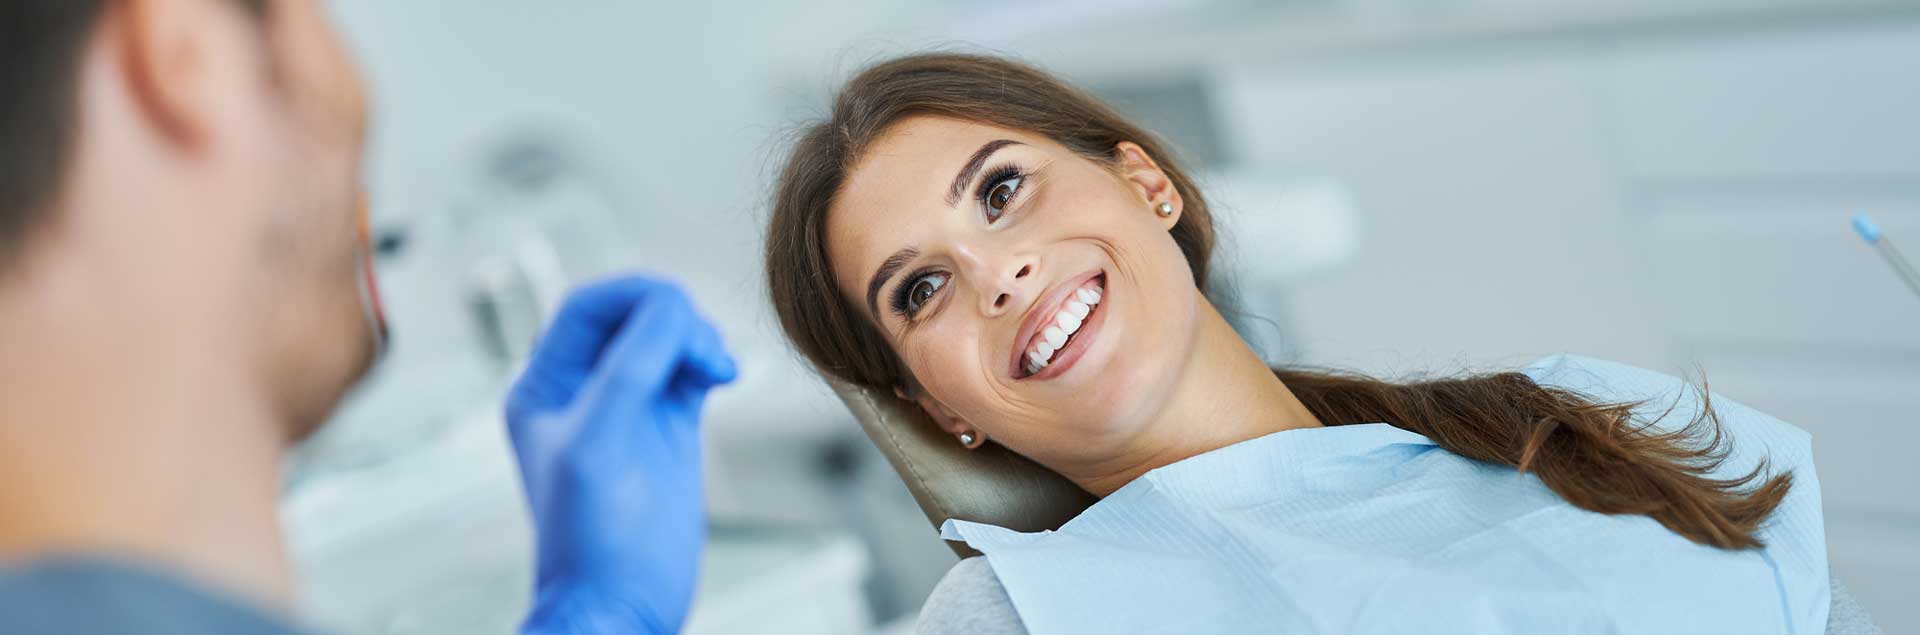 A patient is smiling at the dentist prior to the treatment